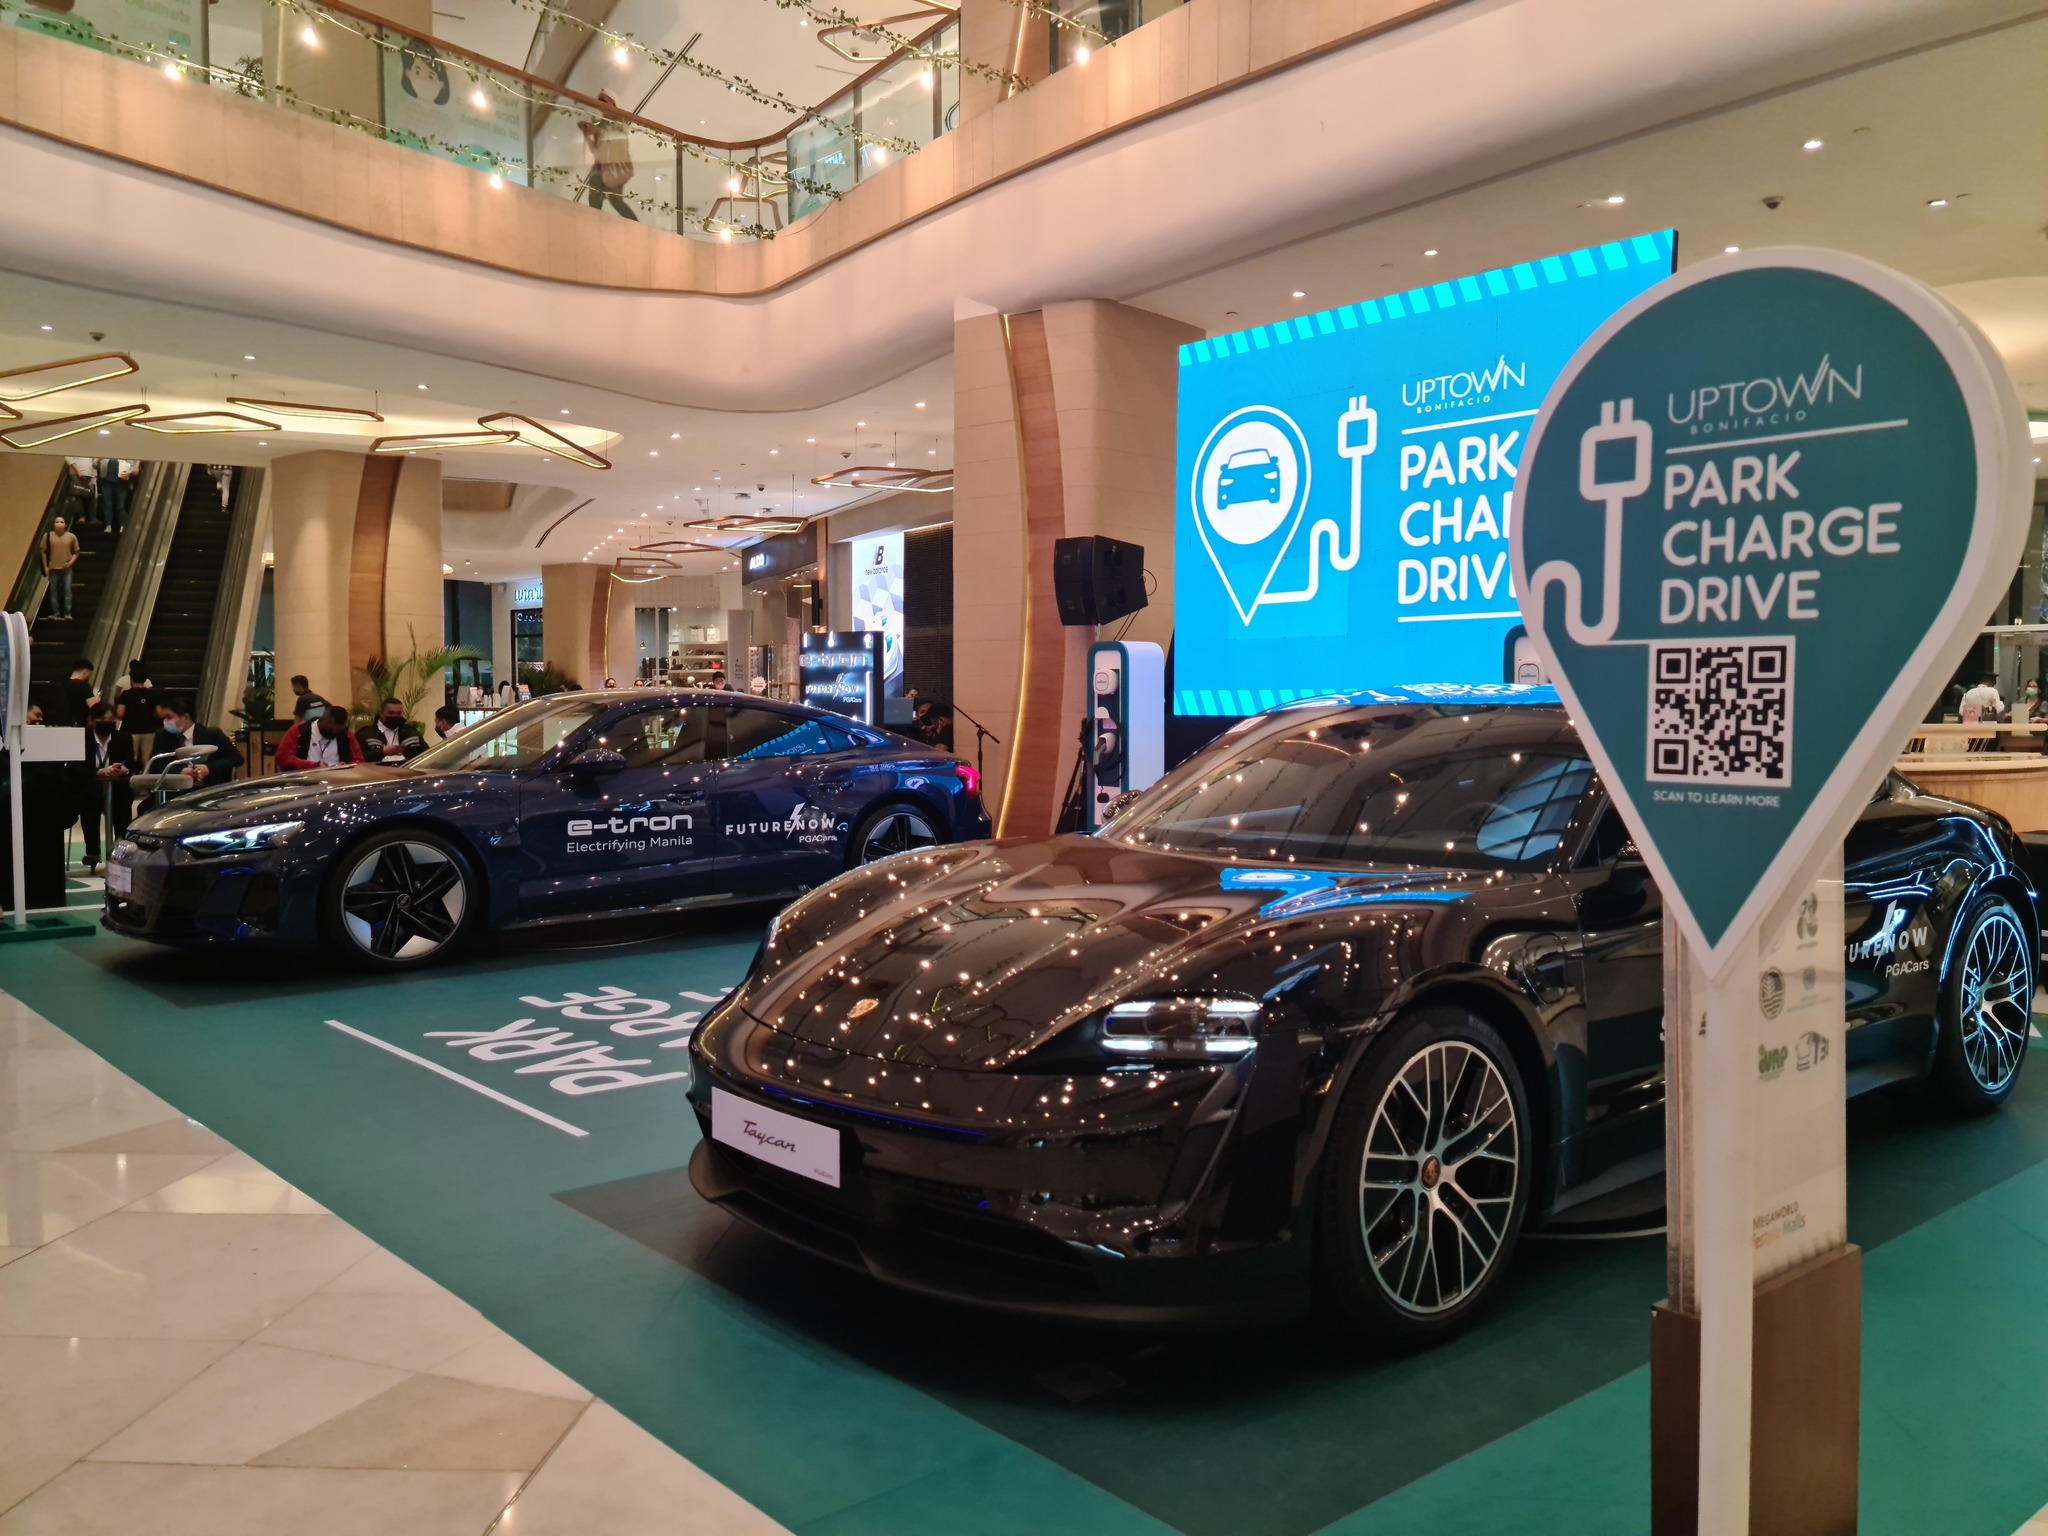 Megaworld gives Uptown mall its own EV charging station; other Megaworld malls to follow